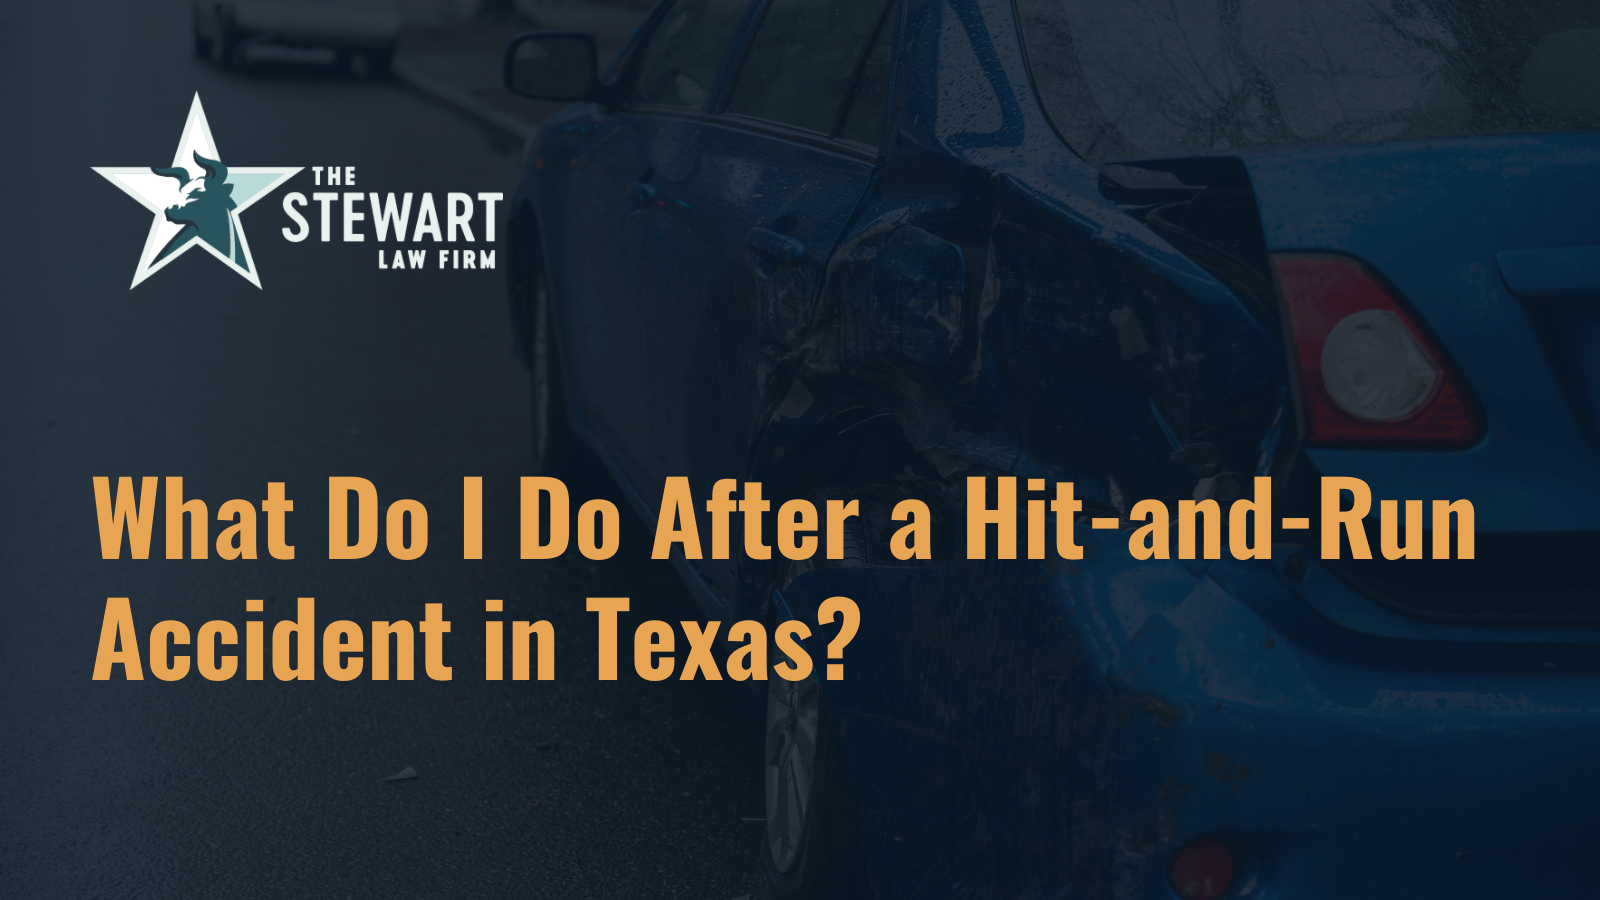 What Do I Do After a Hit-and-Run Accident in Texas - the stewart law firm - austin texas personal injury lawyer